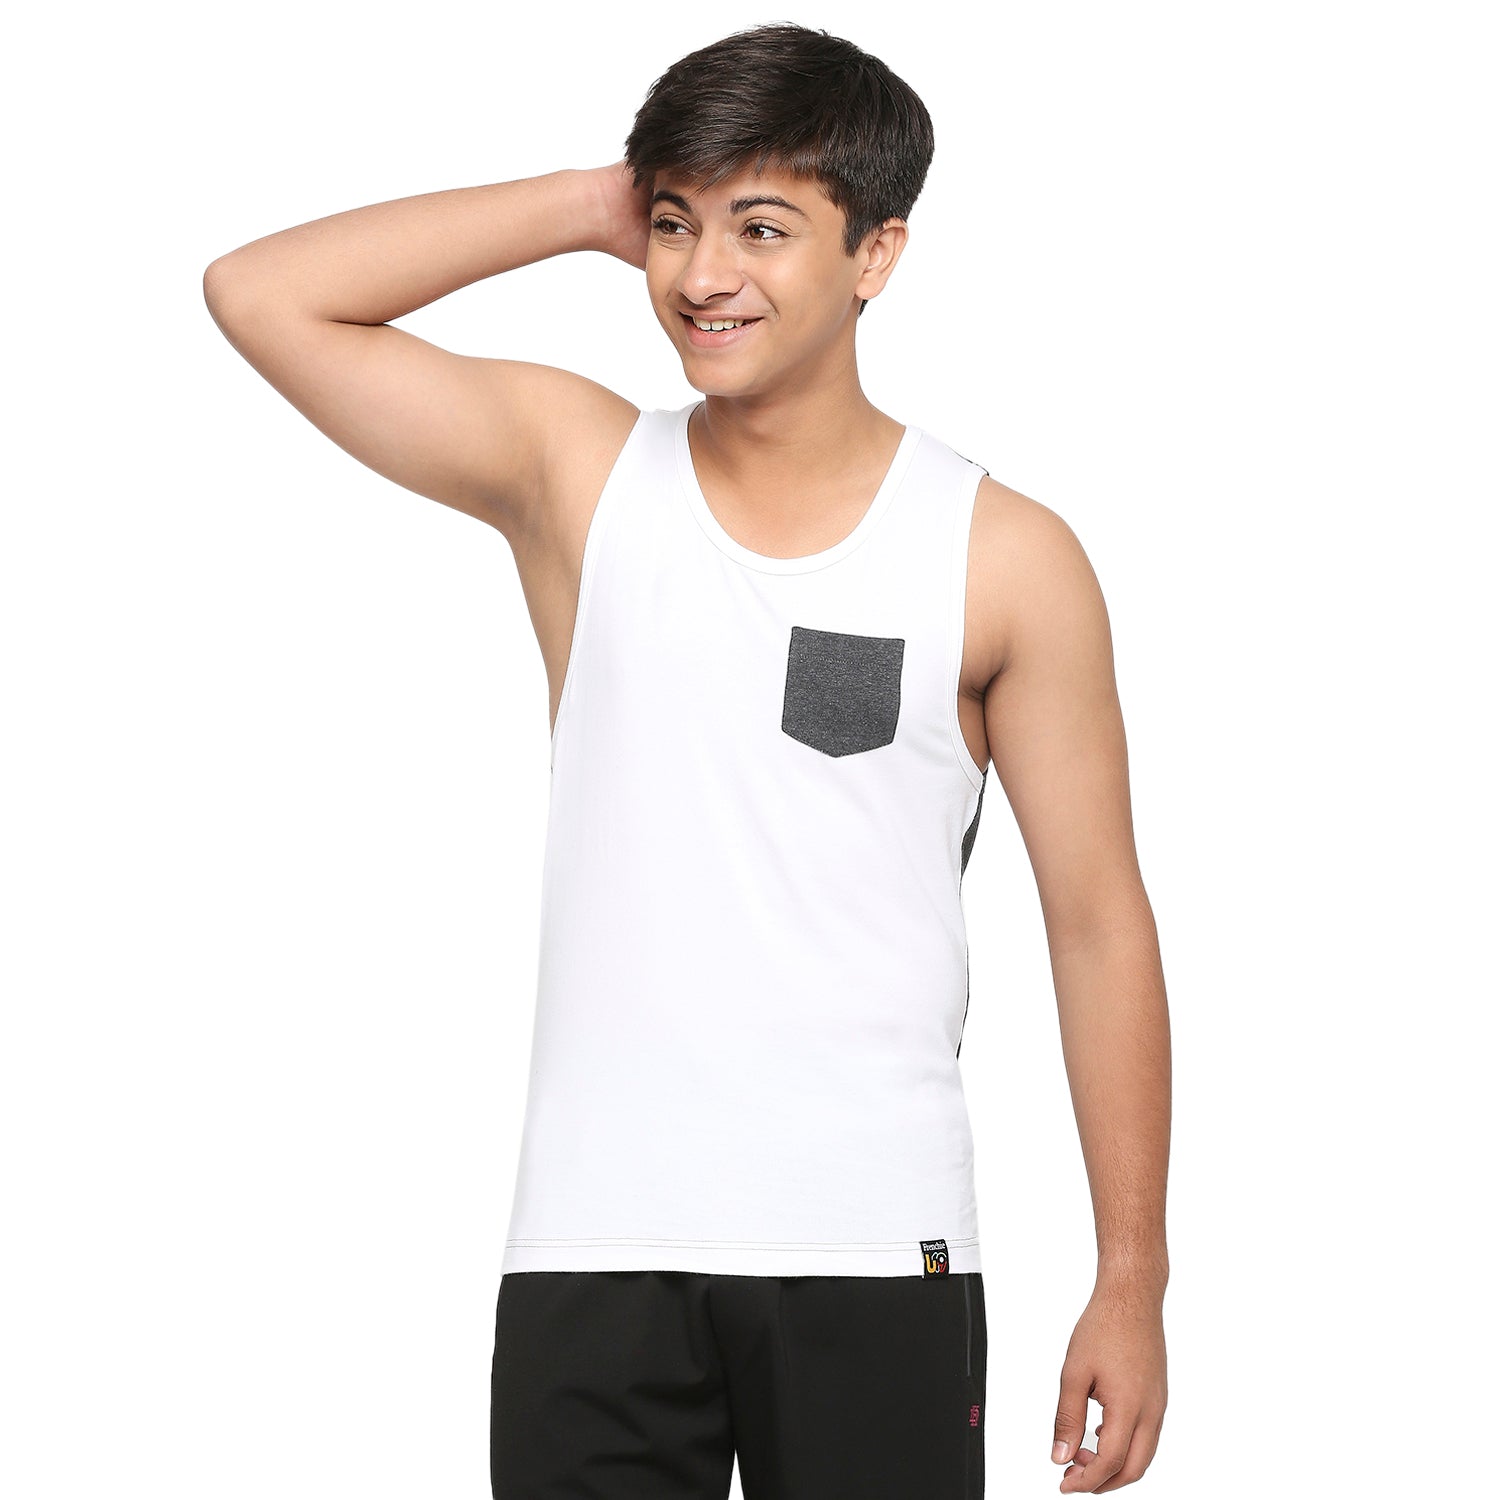 Frenchie U-19 Teens Dark Gray Two colour vest made from cotton lycra melange fabric